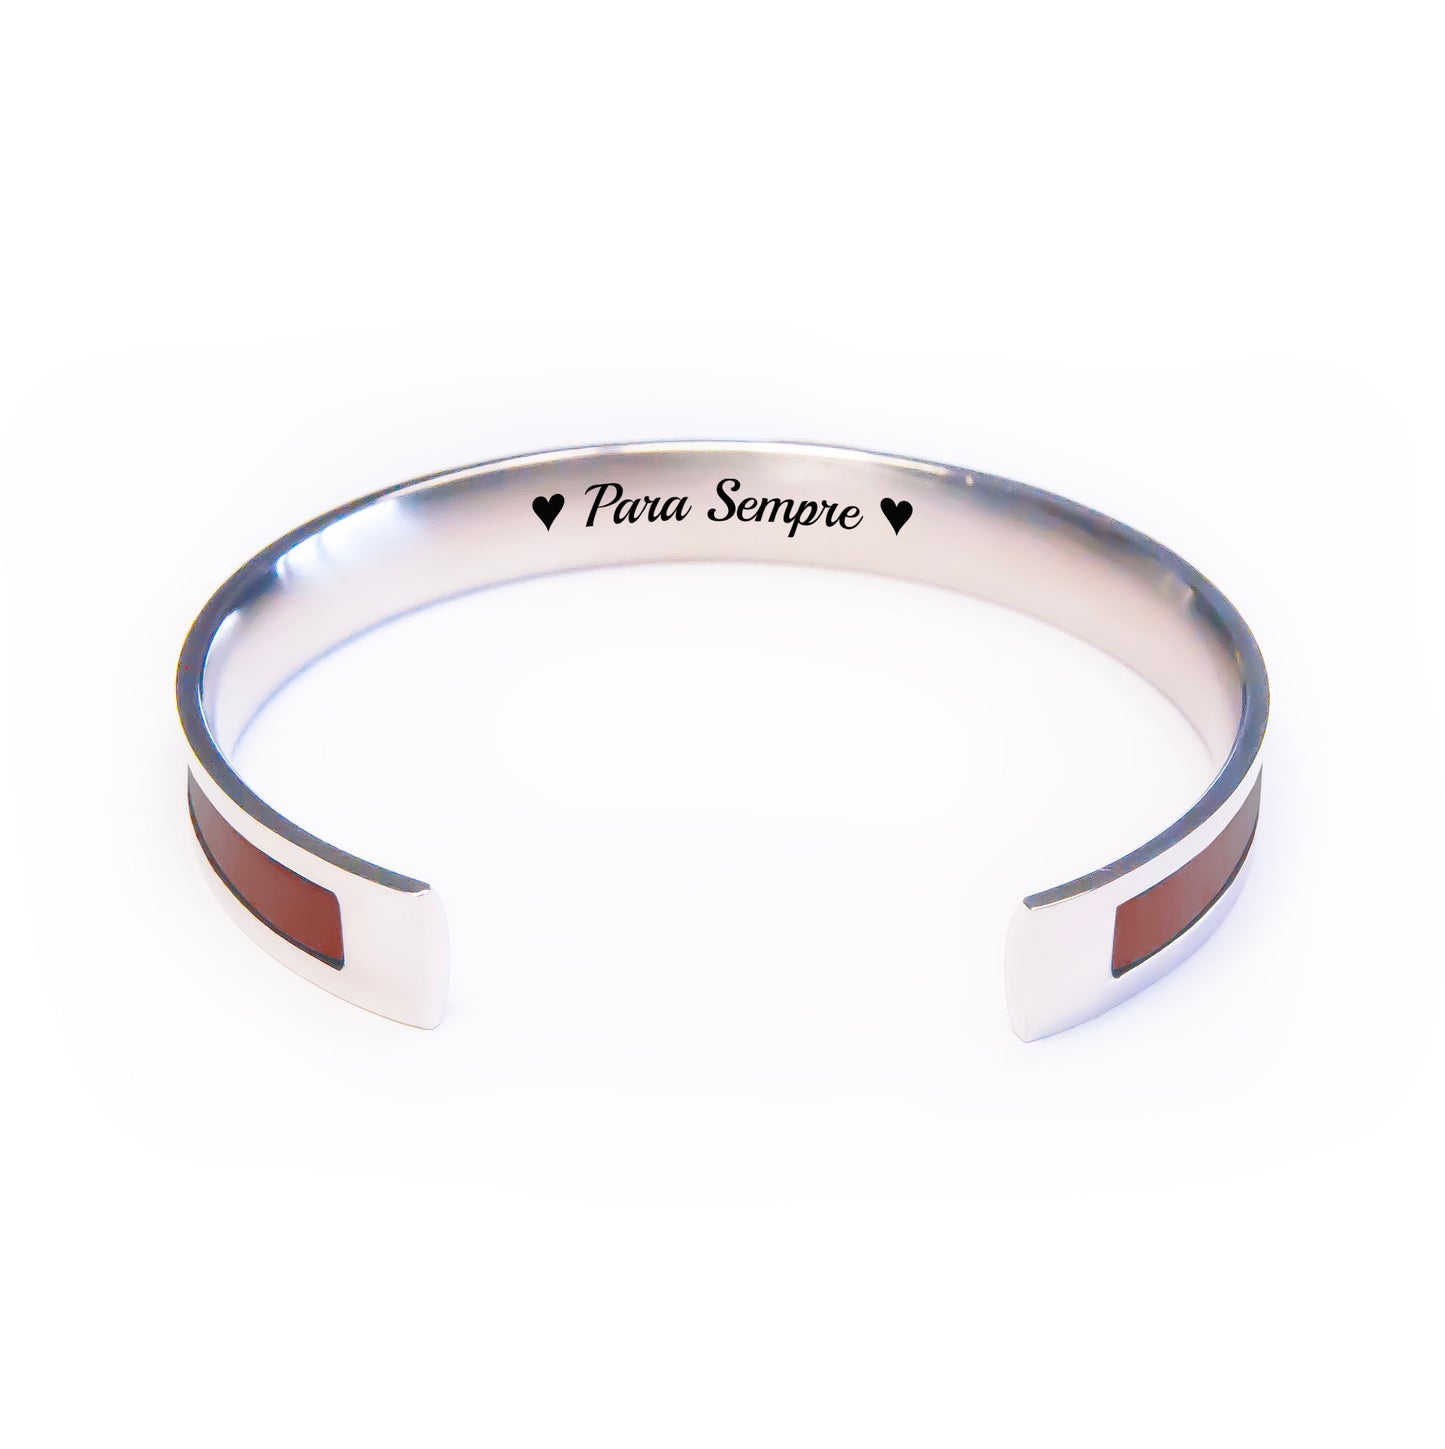 Open Cuff Bracelet for Women Personalized Text Engraved - Gift for Her